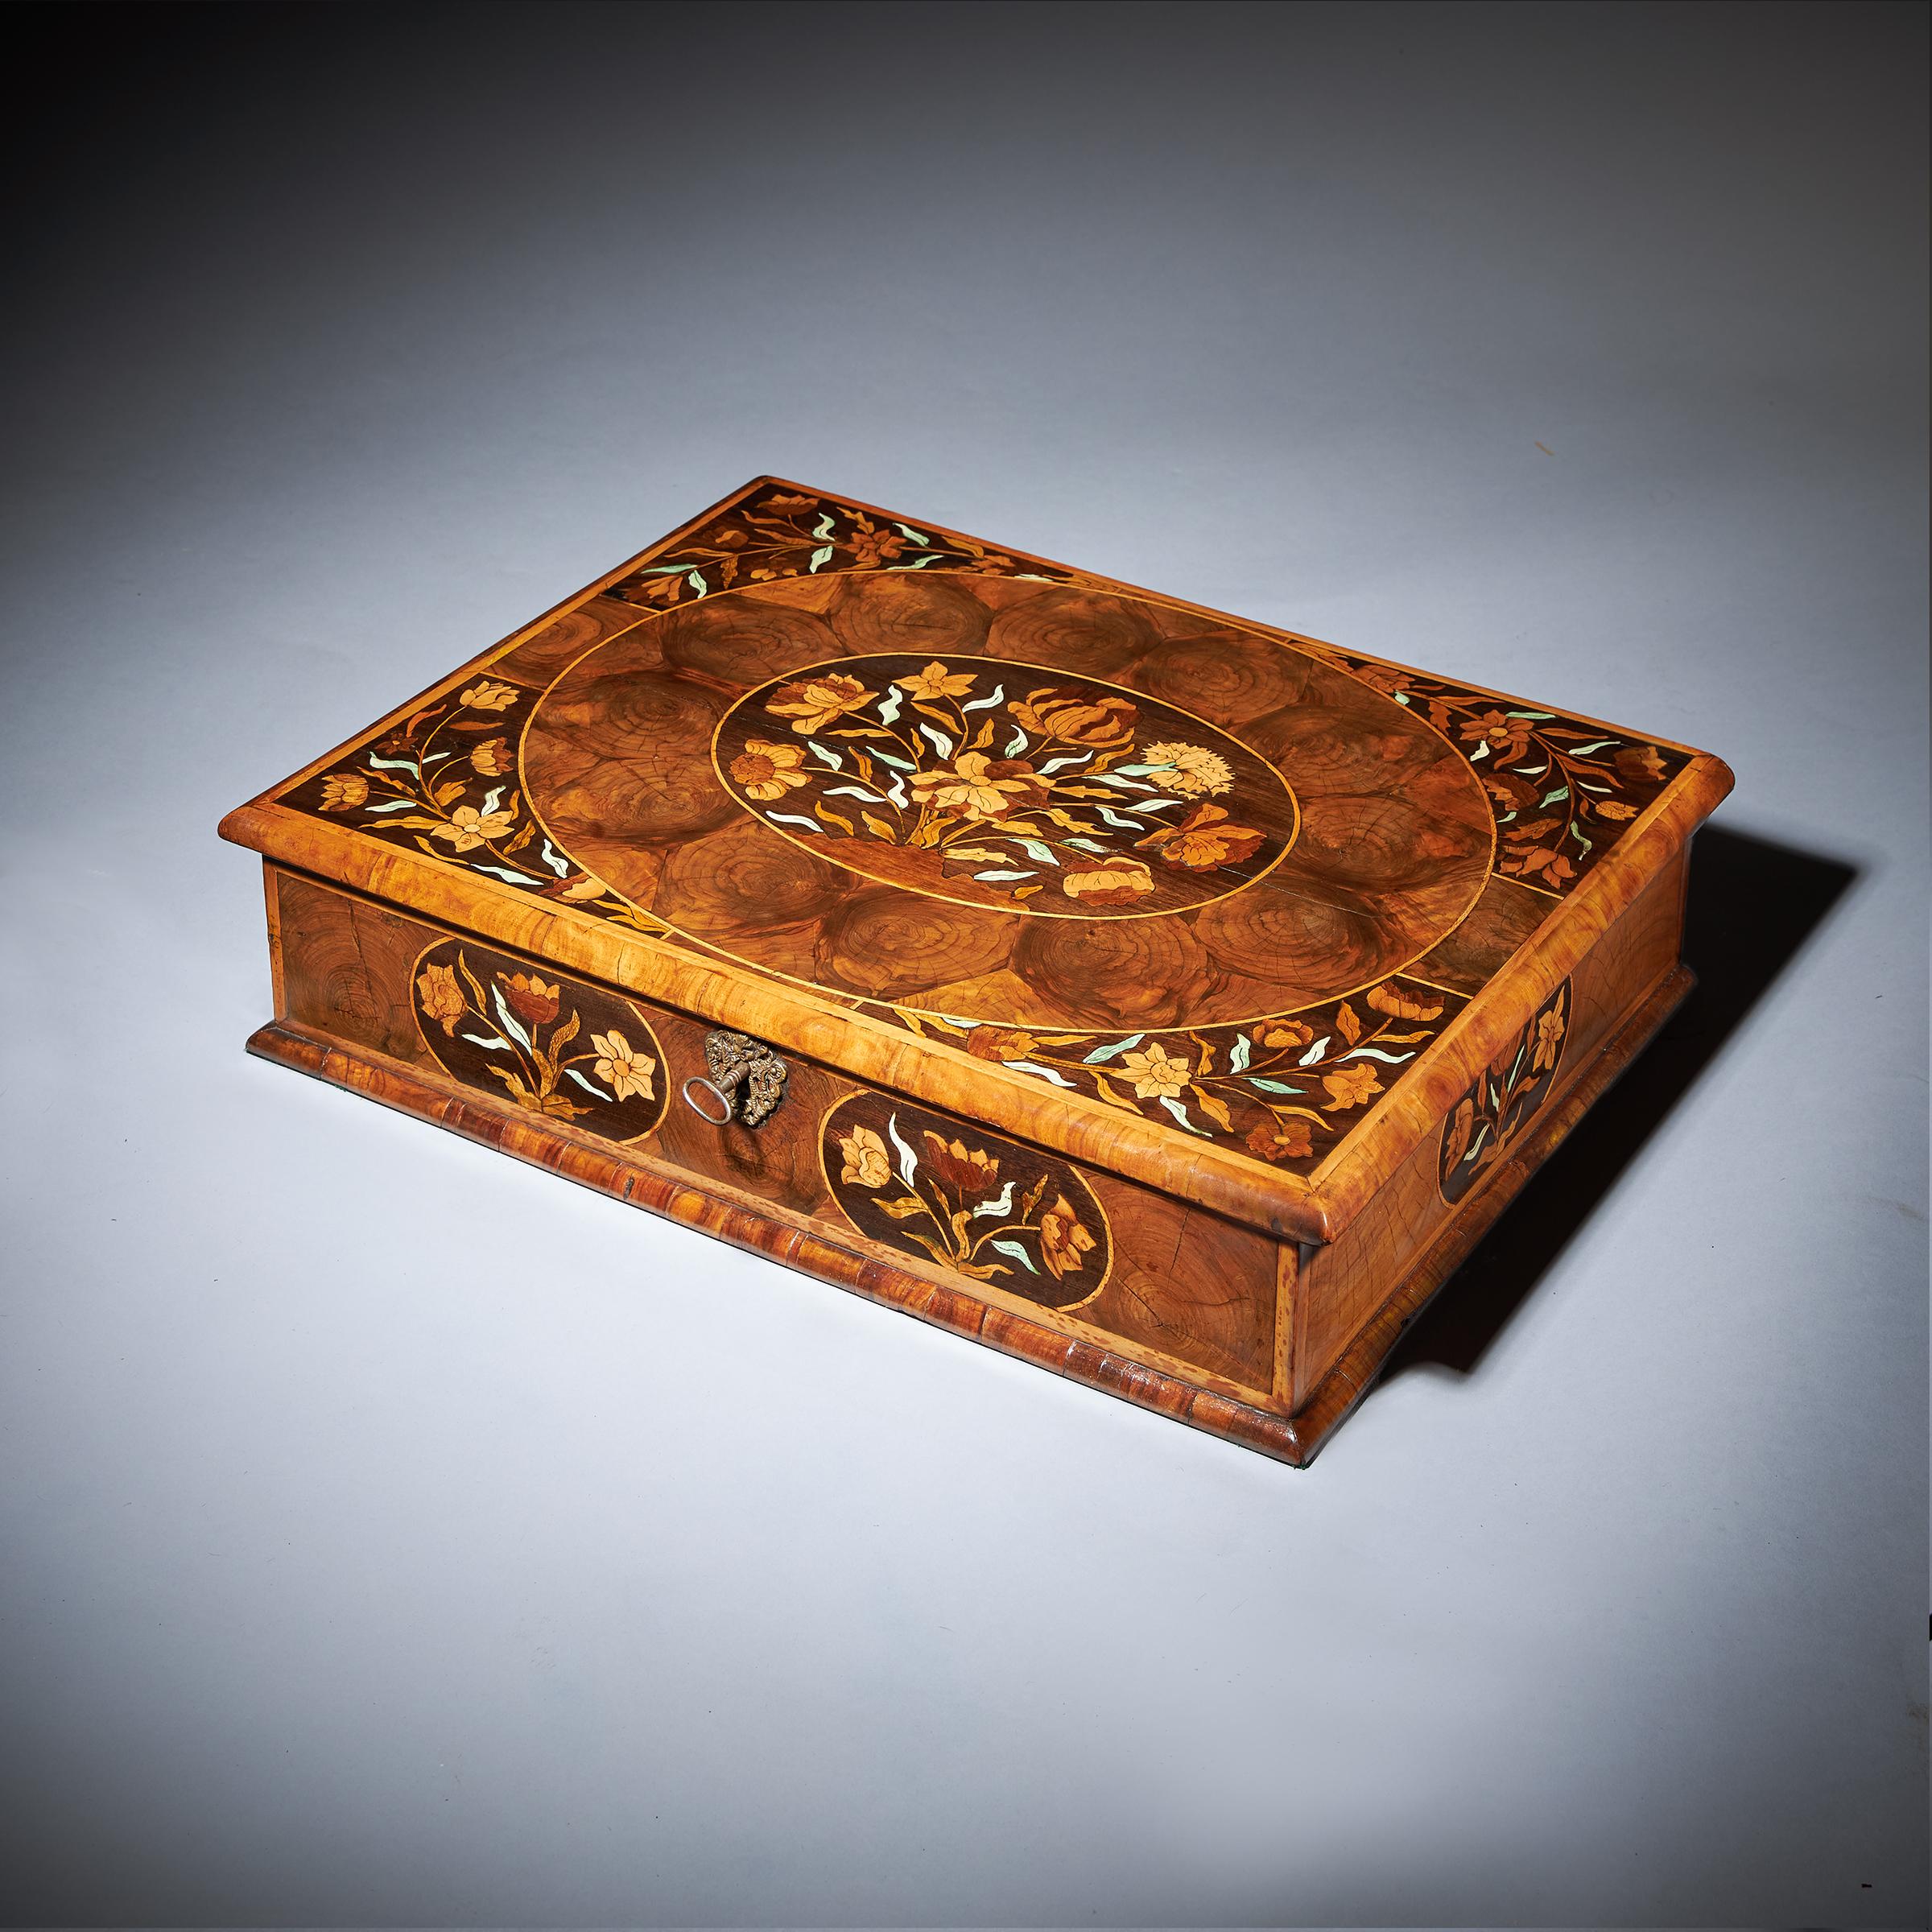 A fine and rare 17th century William and Mary olive oyster marquetry lace box, circa 1670-1690. England

The ovolo-moulded and holly banded top is centred by an oval of marquetry depicting spring flowers bordered in oysters of olive finely strung